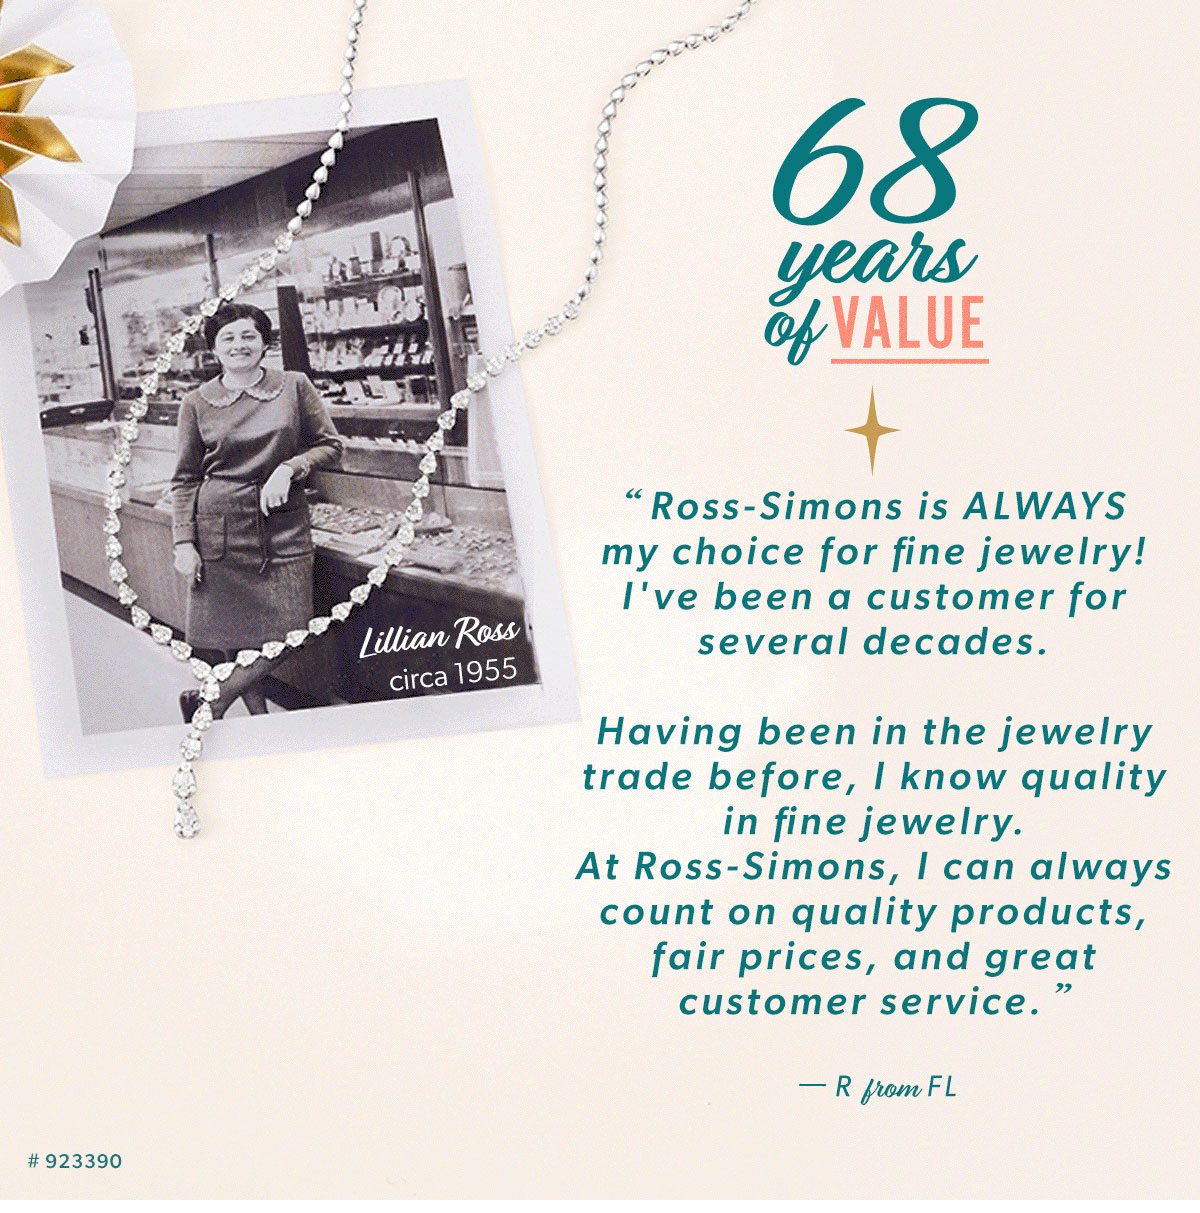 68 Years of Value. Shop Now